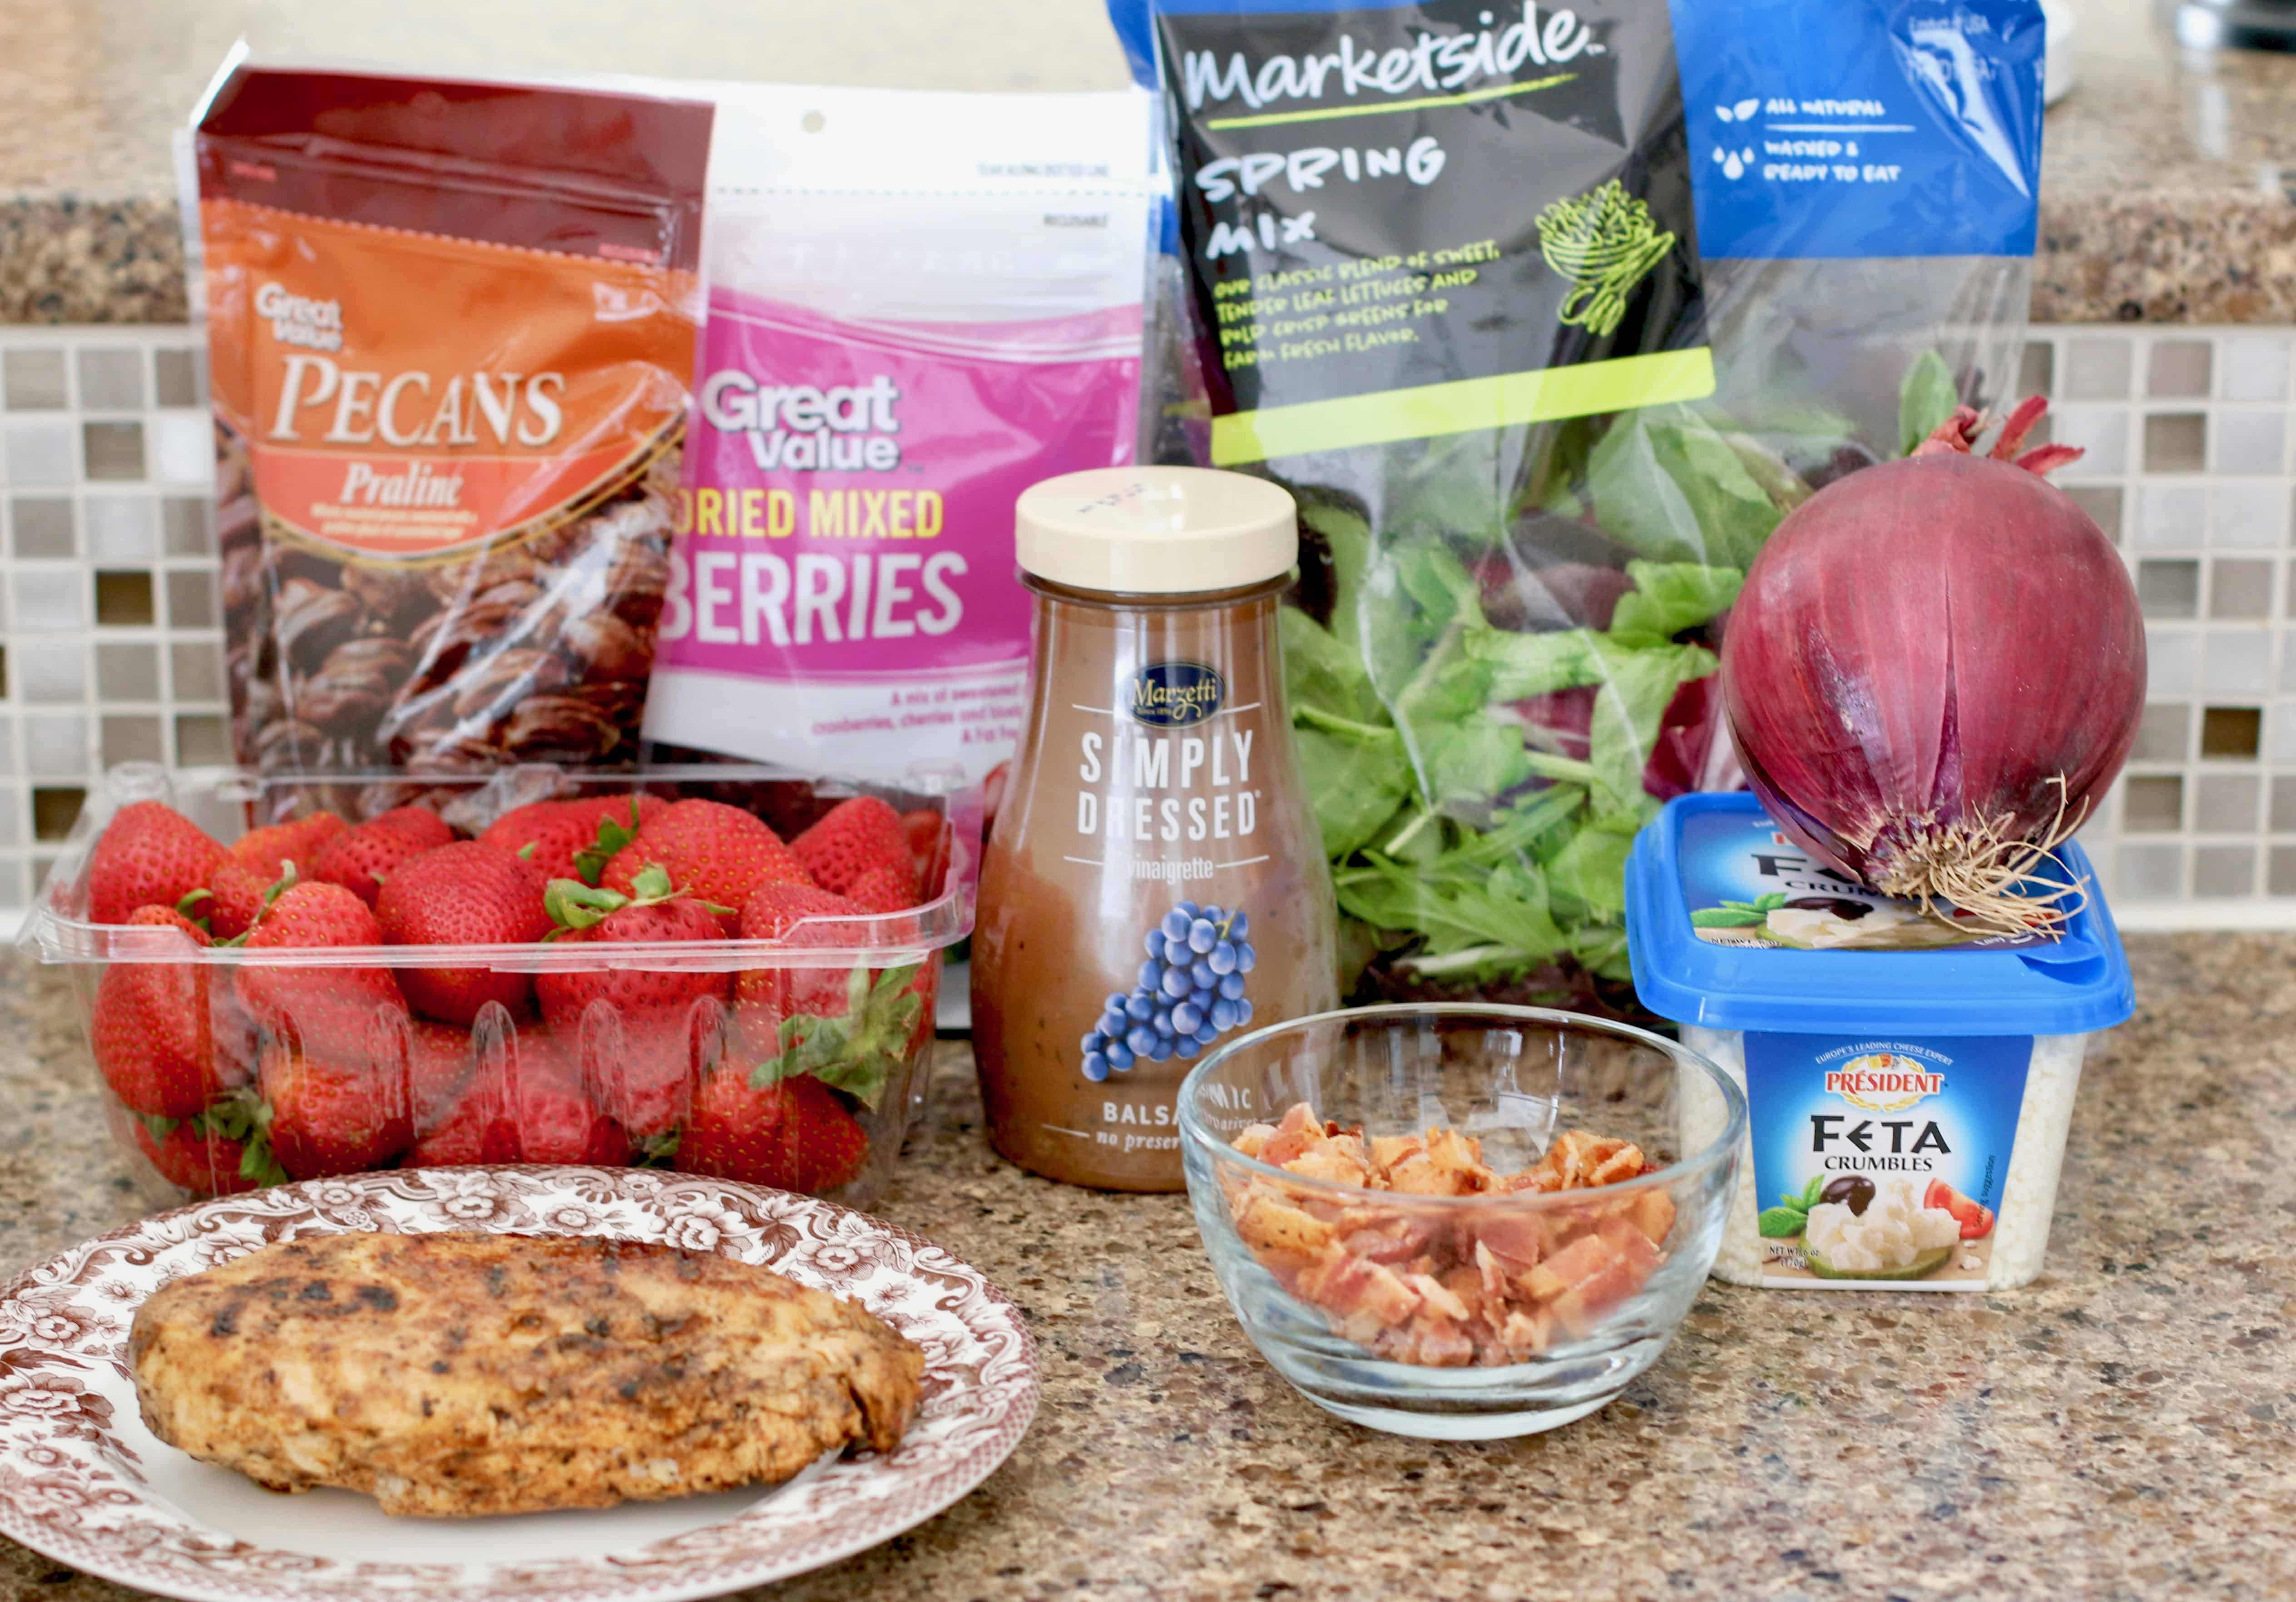 Ingredients needed: spring mixed greens salad, red onions, praline pecans, dried cranberries and cherries, bacon, grilled chicken, feta cheese, strawberries.